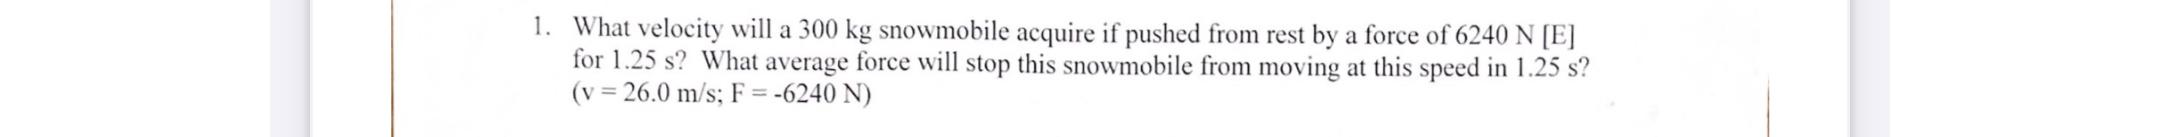 1. What velocity will a 300 kg snowmobile acquire if pushed from rest by a force of 6240 N [E] for 1.25 s?